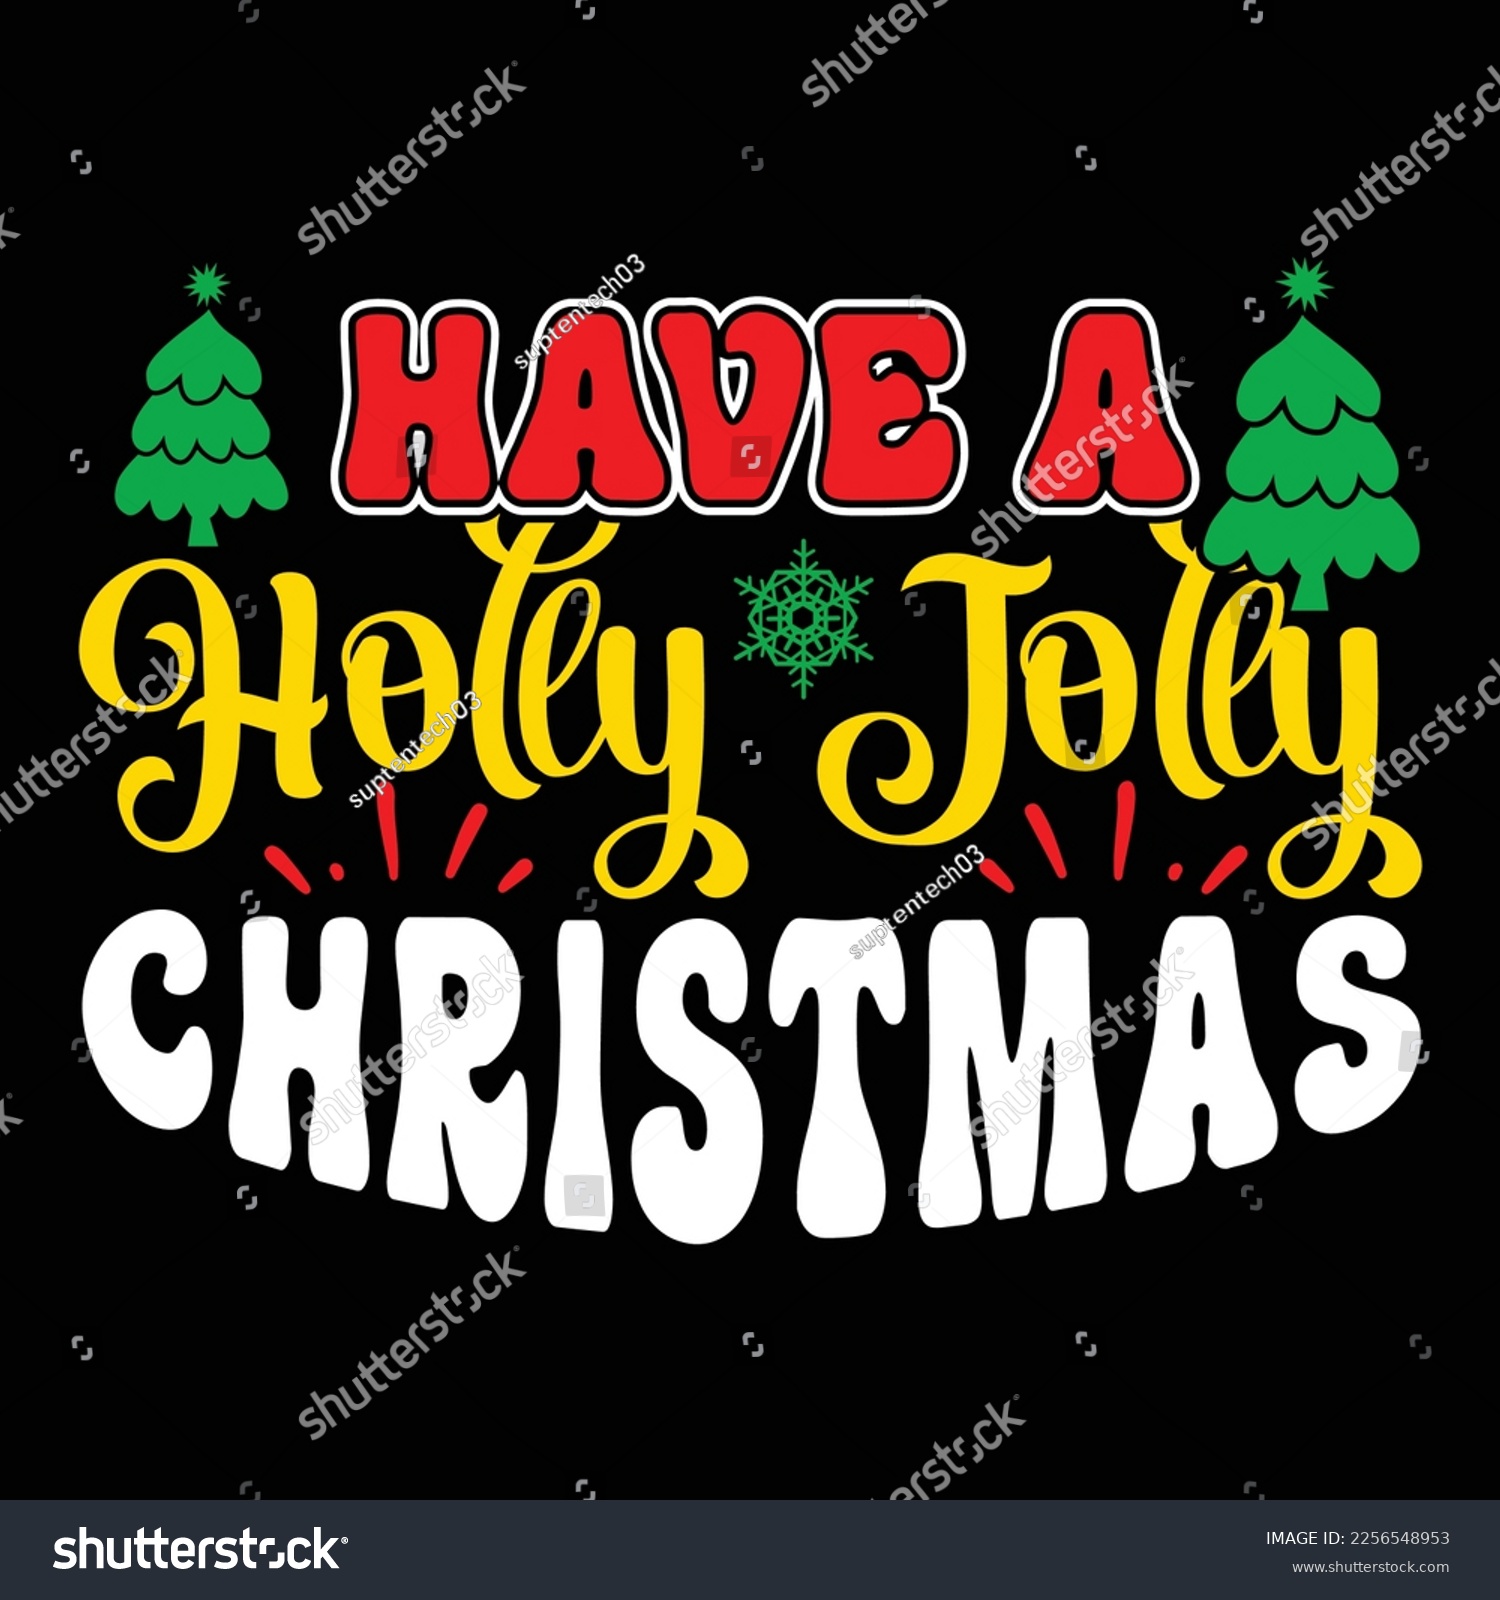 SVG of Have A Holly Jolly Christmas, Merry Christmas shirts Print Template, Xmas Ugly Snow Santa Clouse New Year Holiday Candy Santa Hat vector illustration for Christmas hand lettered svg